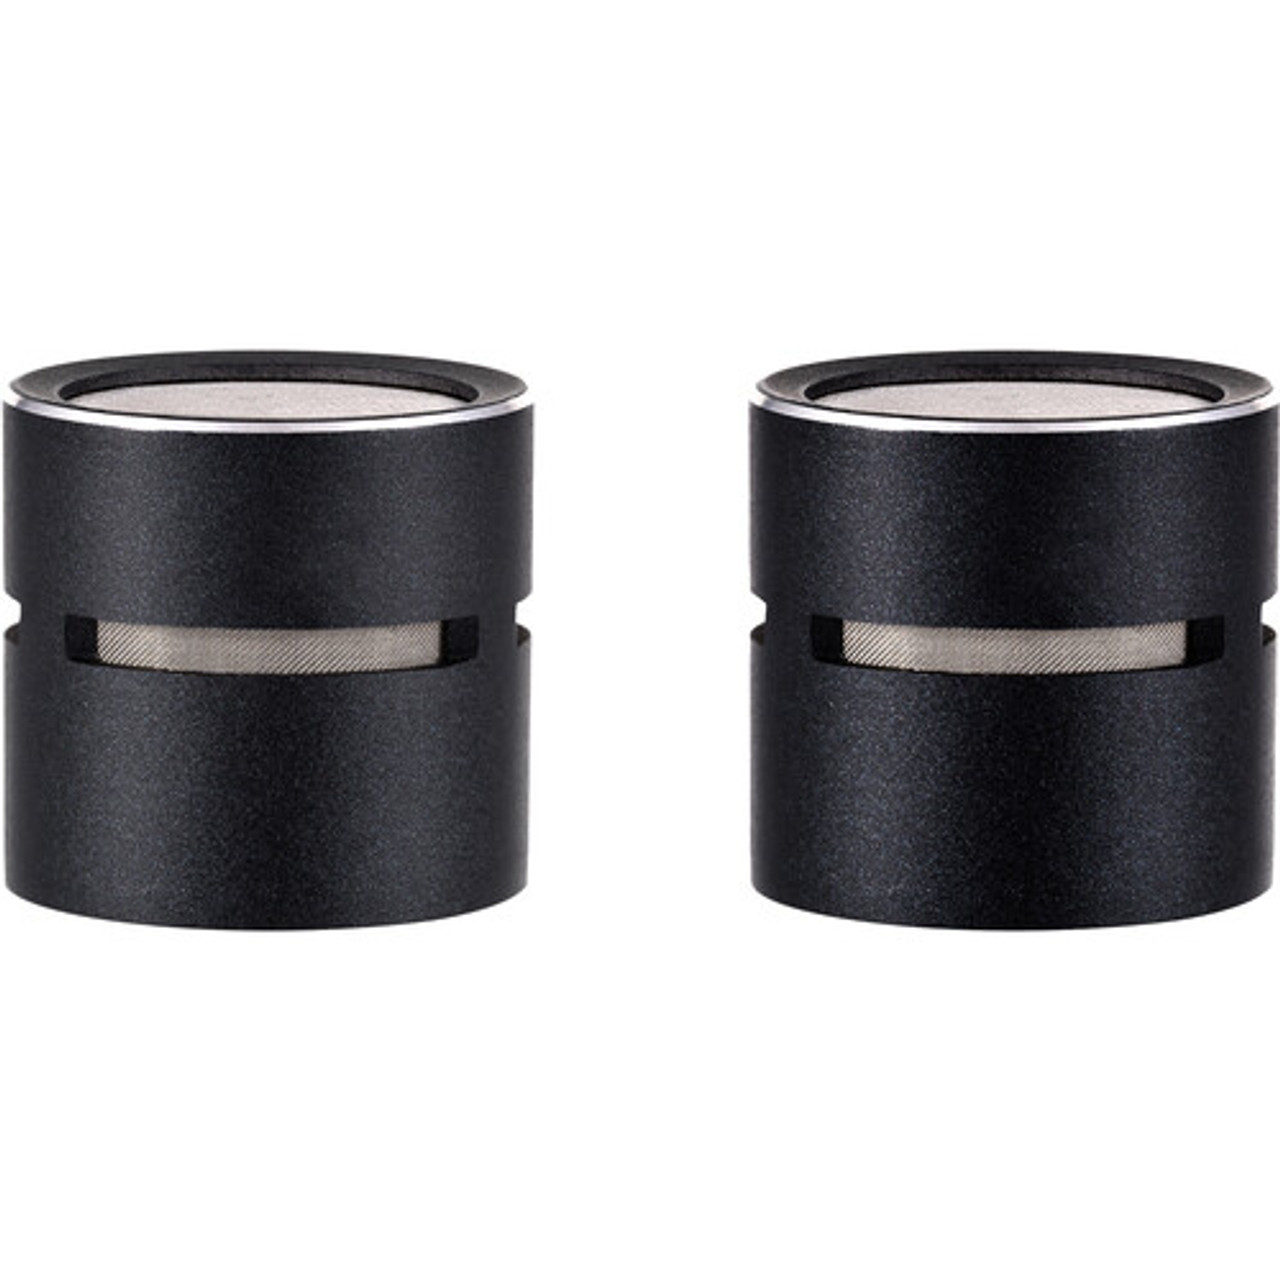 sE Electronics Factory Matched Pair of Cardioid Pattern Capsules for sE8 Microphones (SE8-CARD-CAP-PAIR-U)